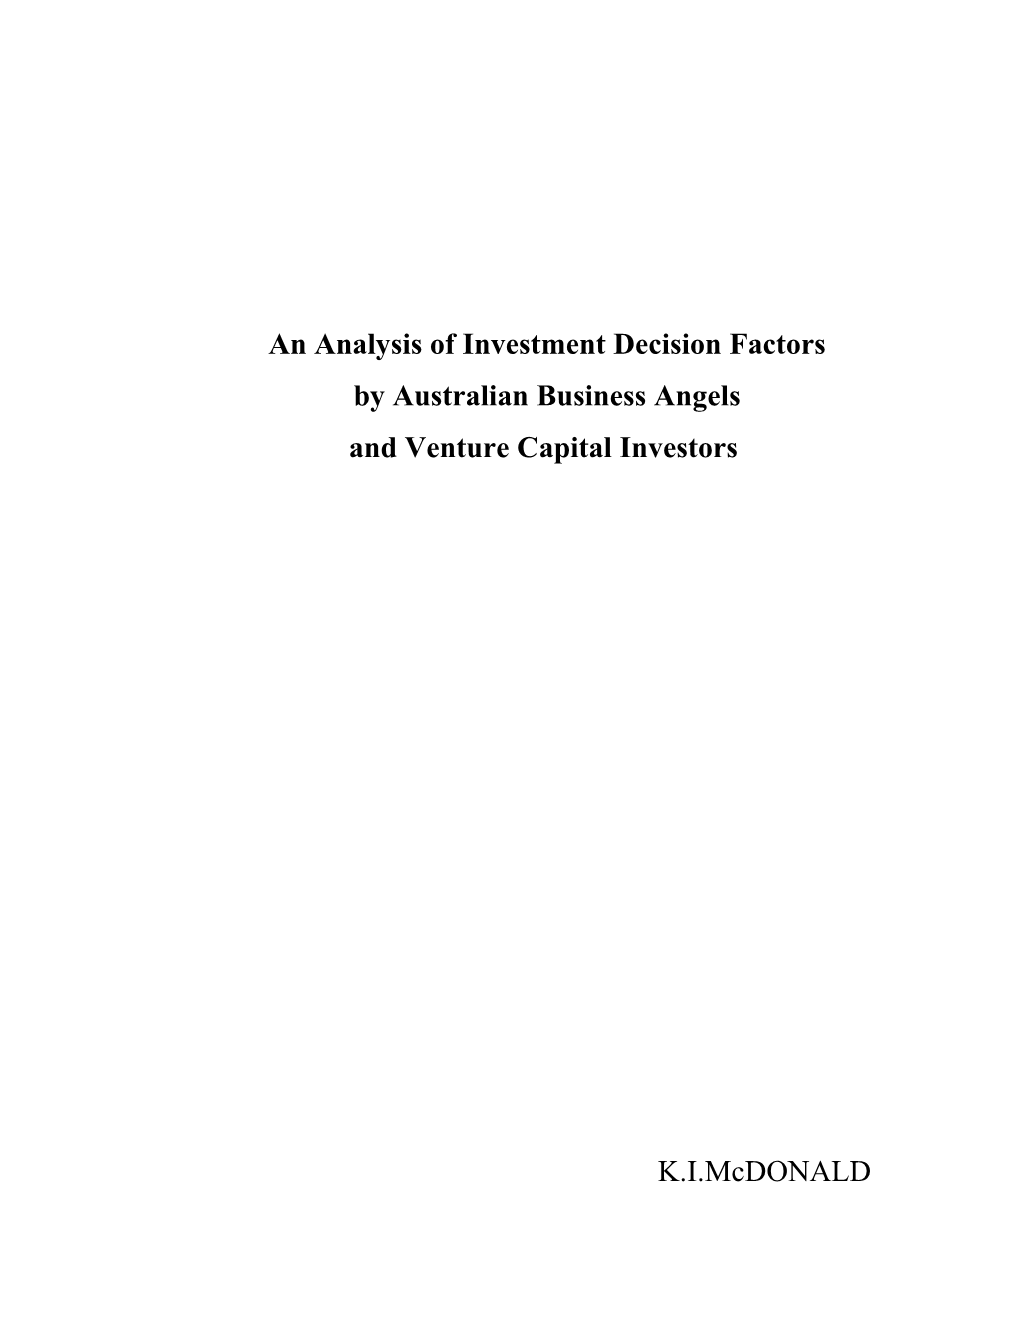 An Analysis of Investment Decision Factors by Australian Business Angels and Venture Capital Investors